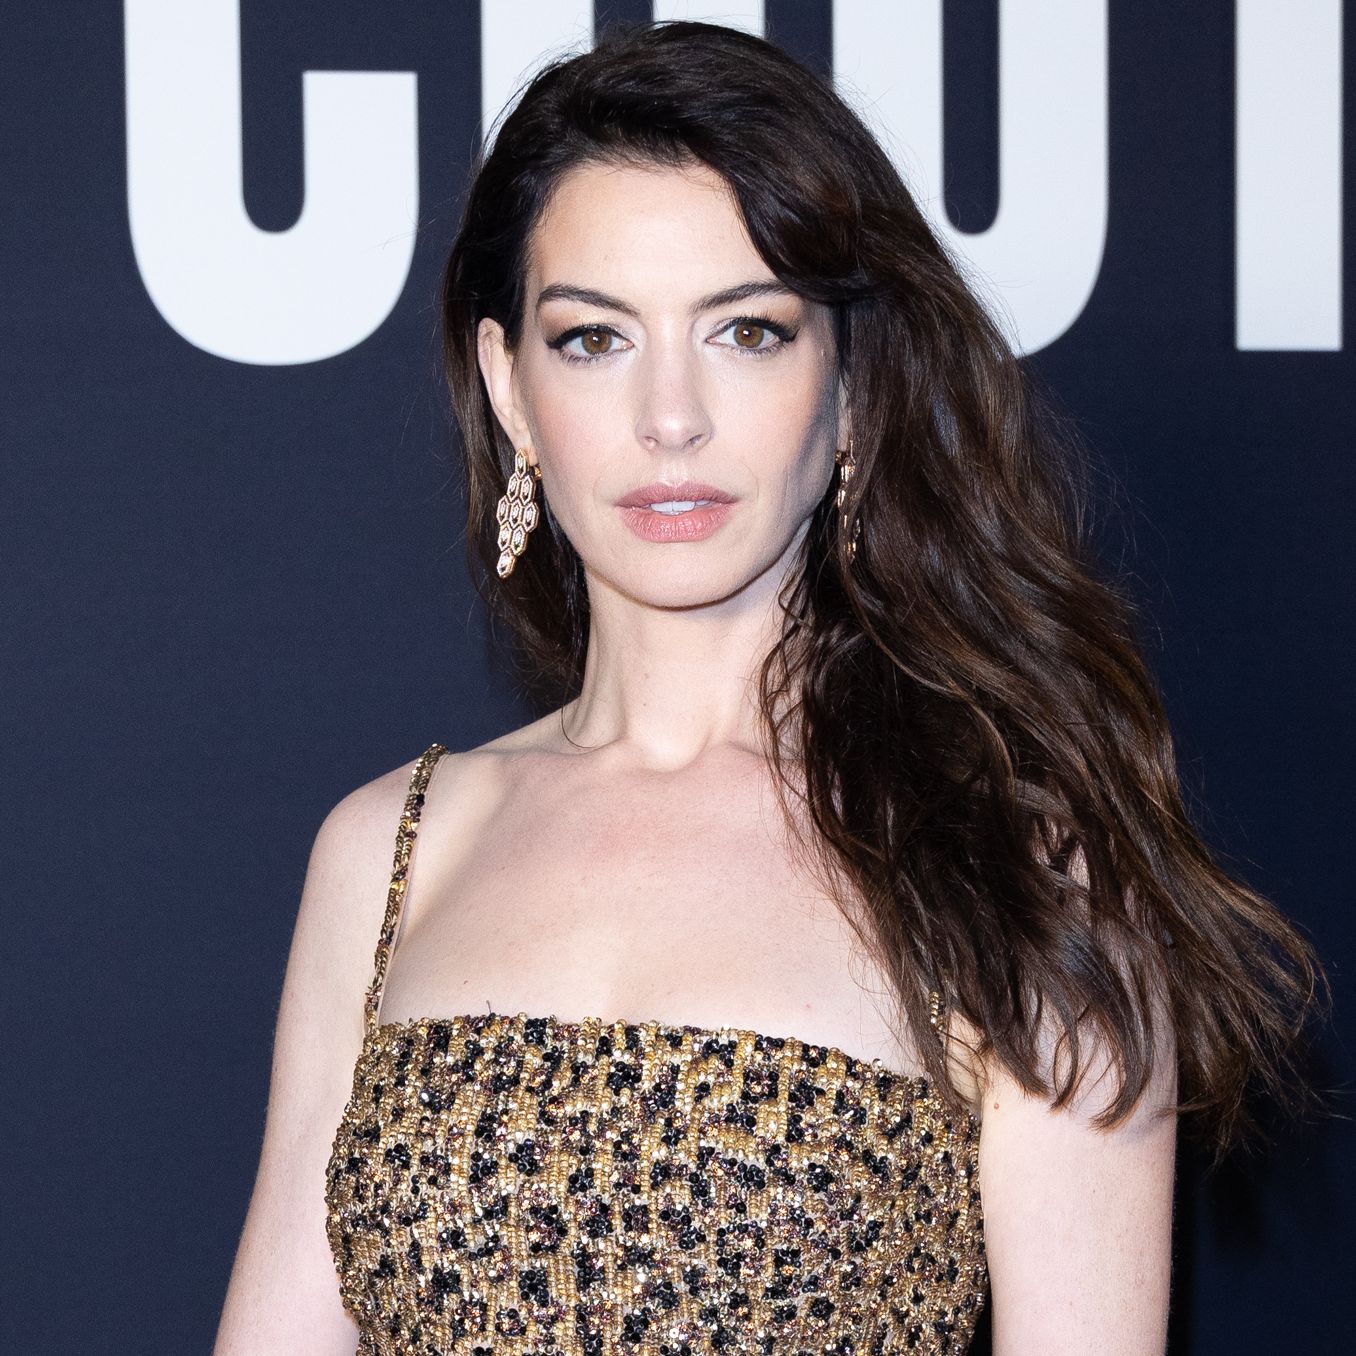 This TikTok of Anne Hathaway Dancing at Valentino's After Party Is Rightfully Going Viral